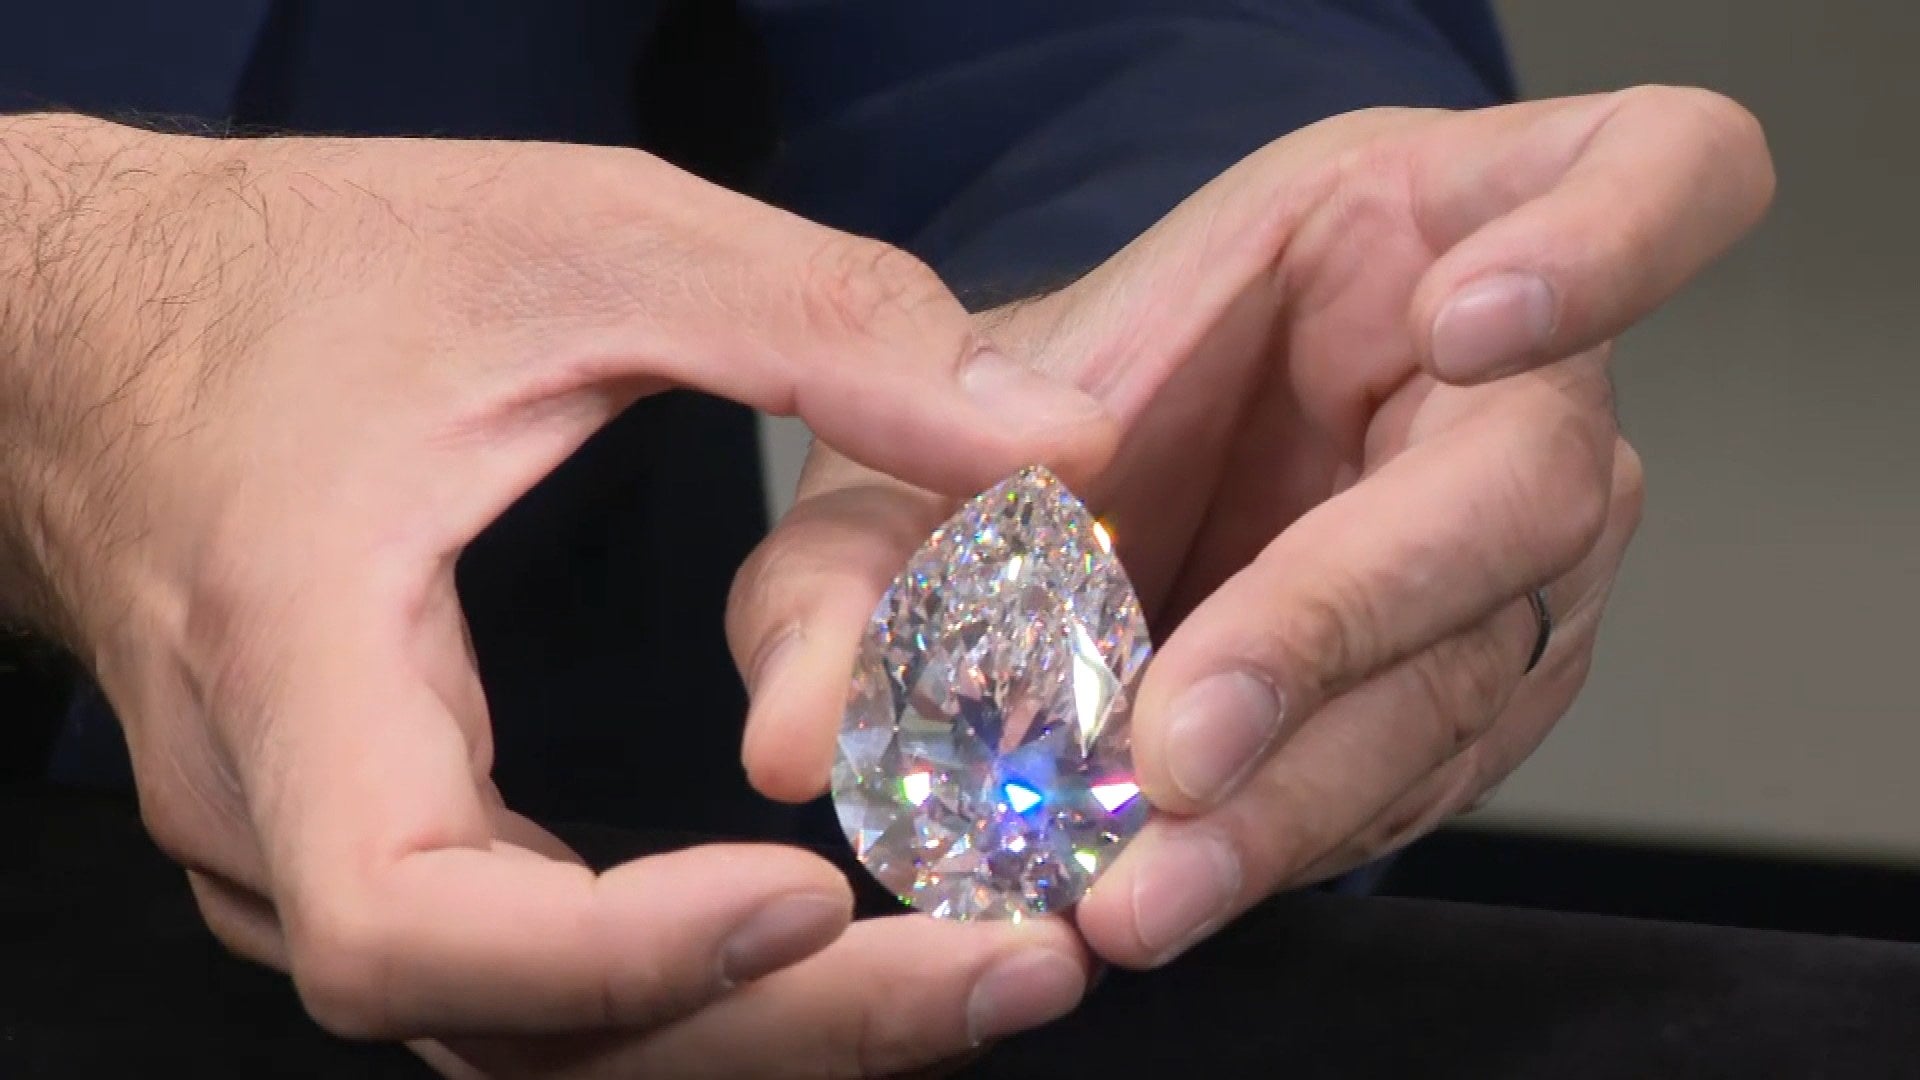 The Rock' diamond, goes up for auction